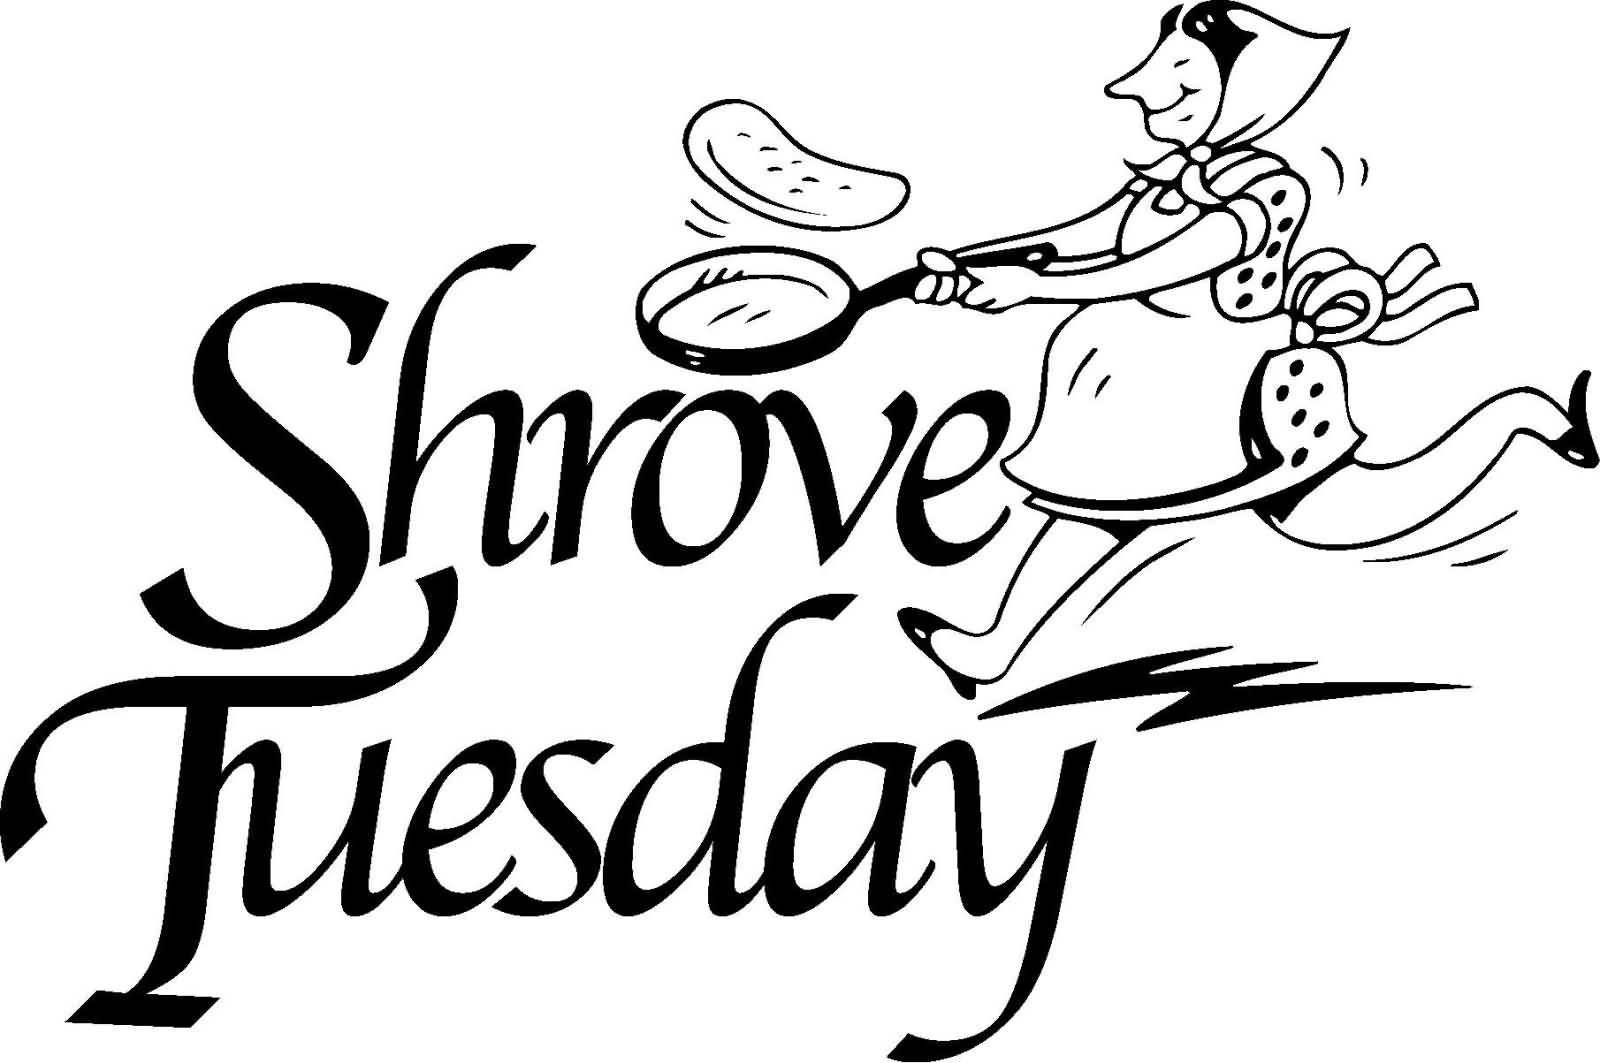 Shrove Tuesday Tossing Pancakes Black And White Clipart